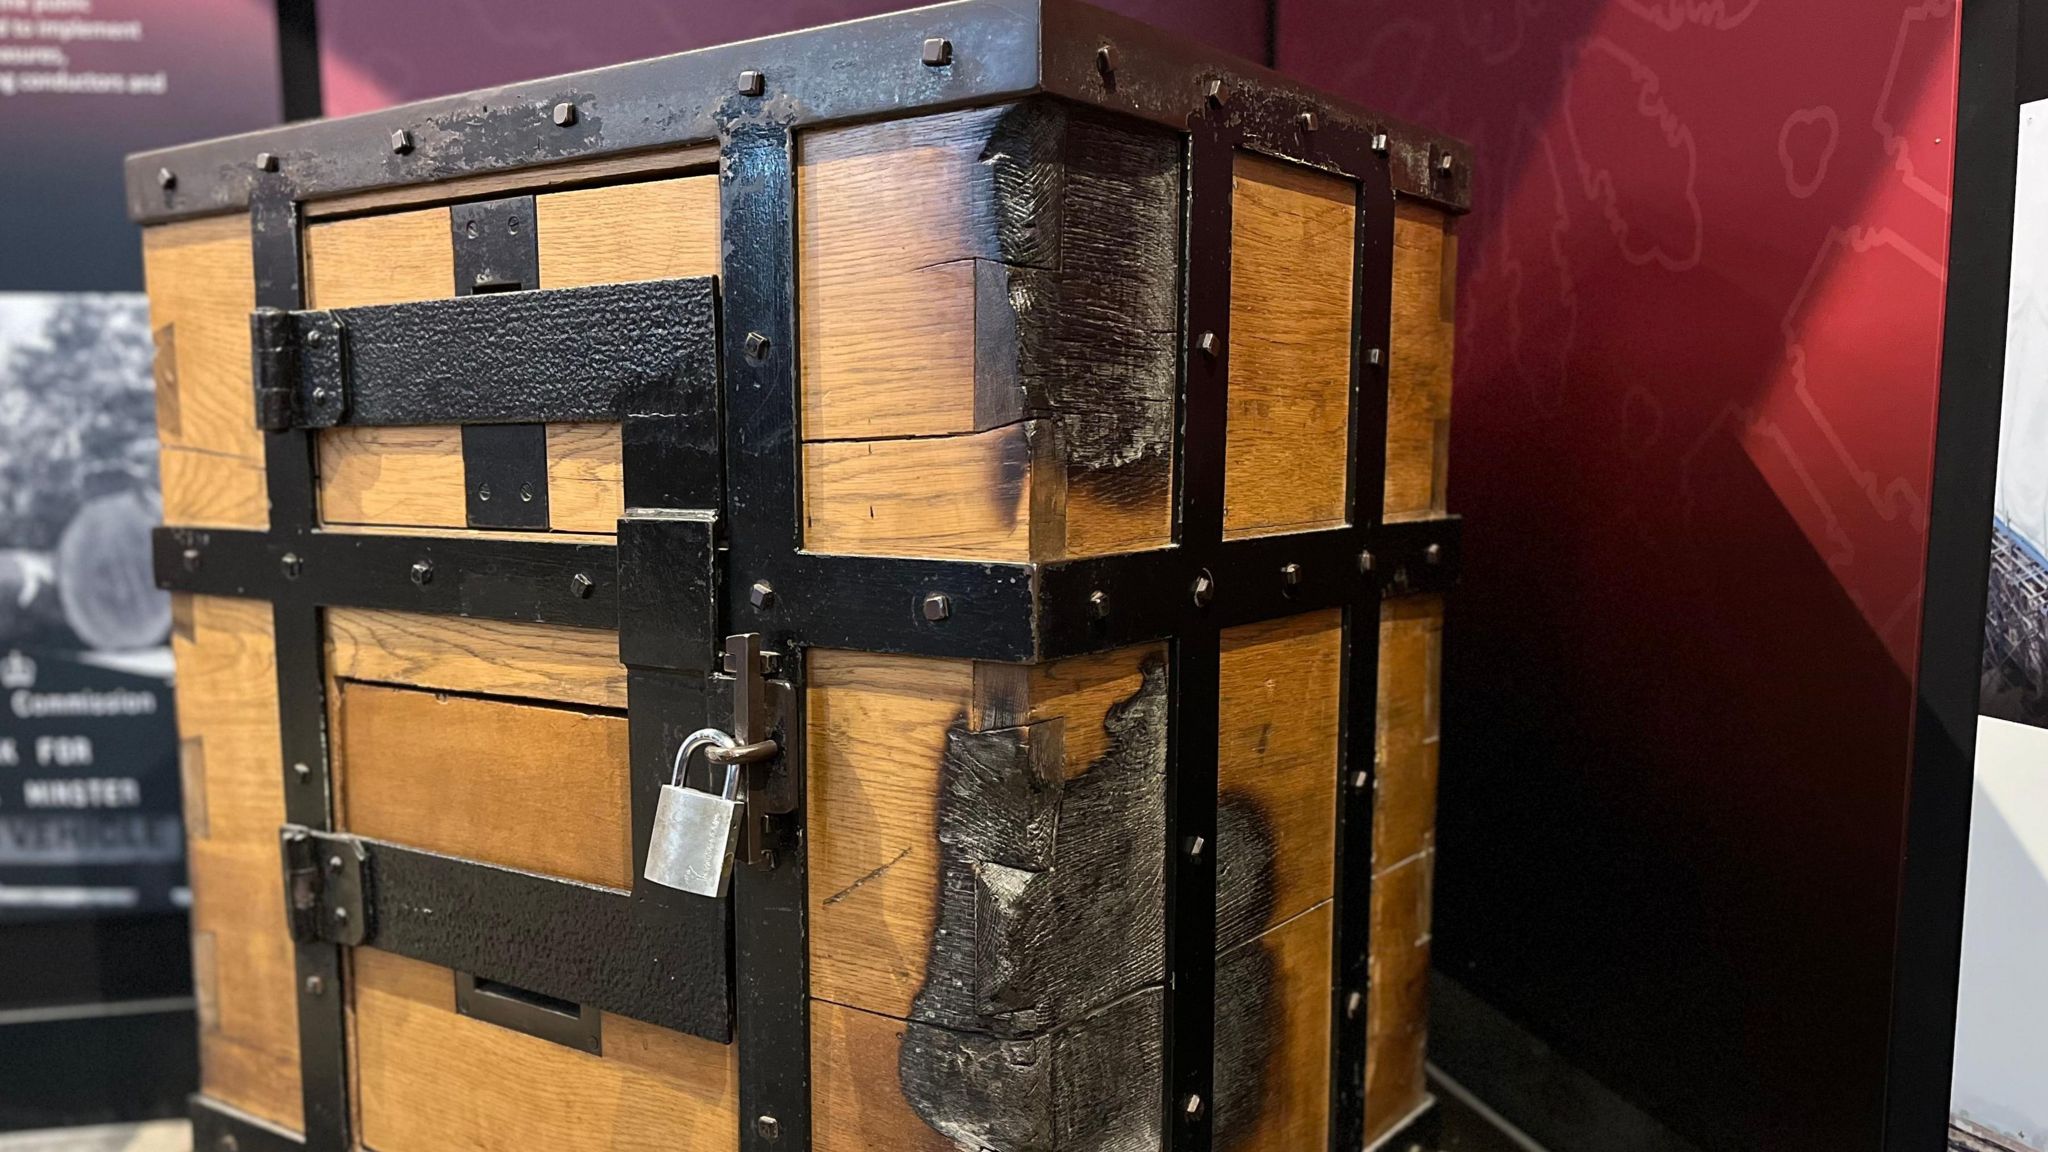 An old donation box with lead bars around it and a big silver lock in the corner of the exhibition showing scorched marks along the front right hand side of the box